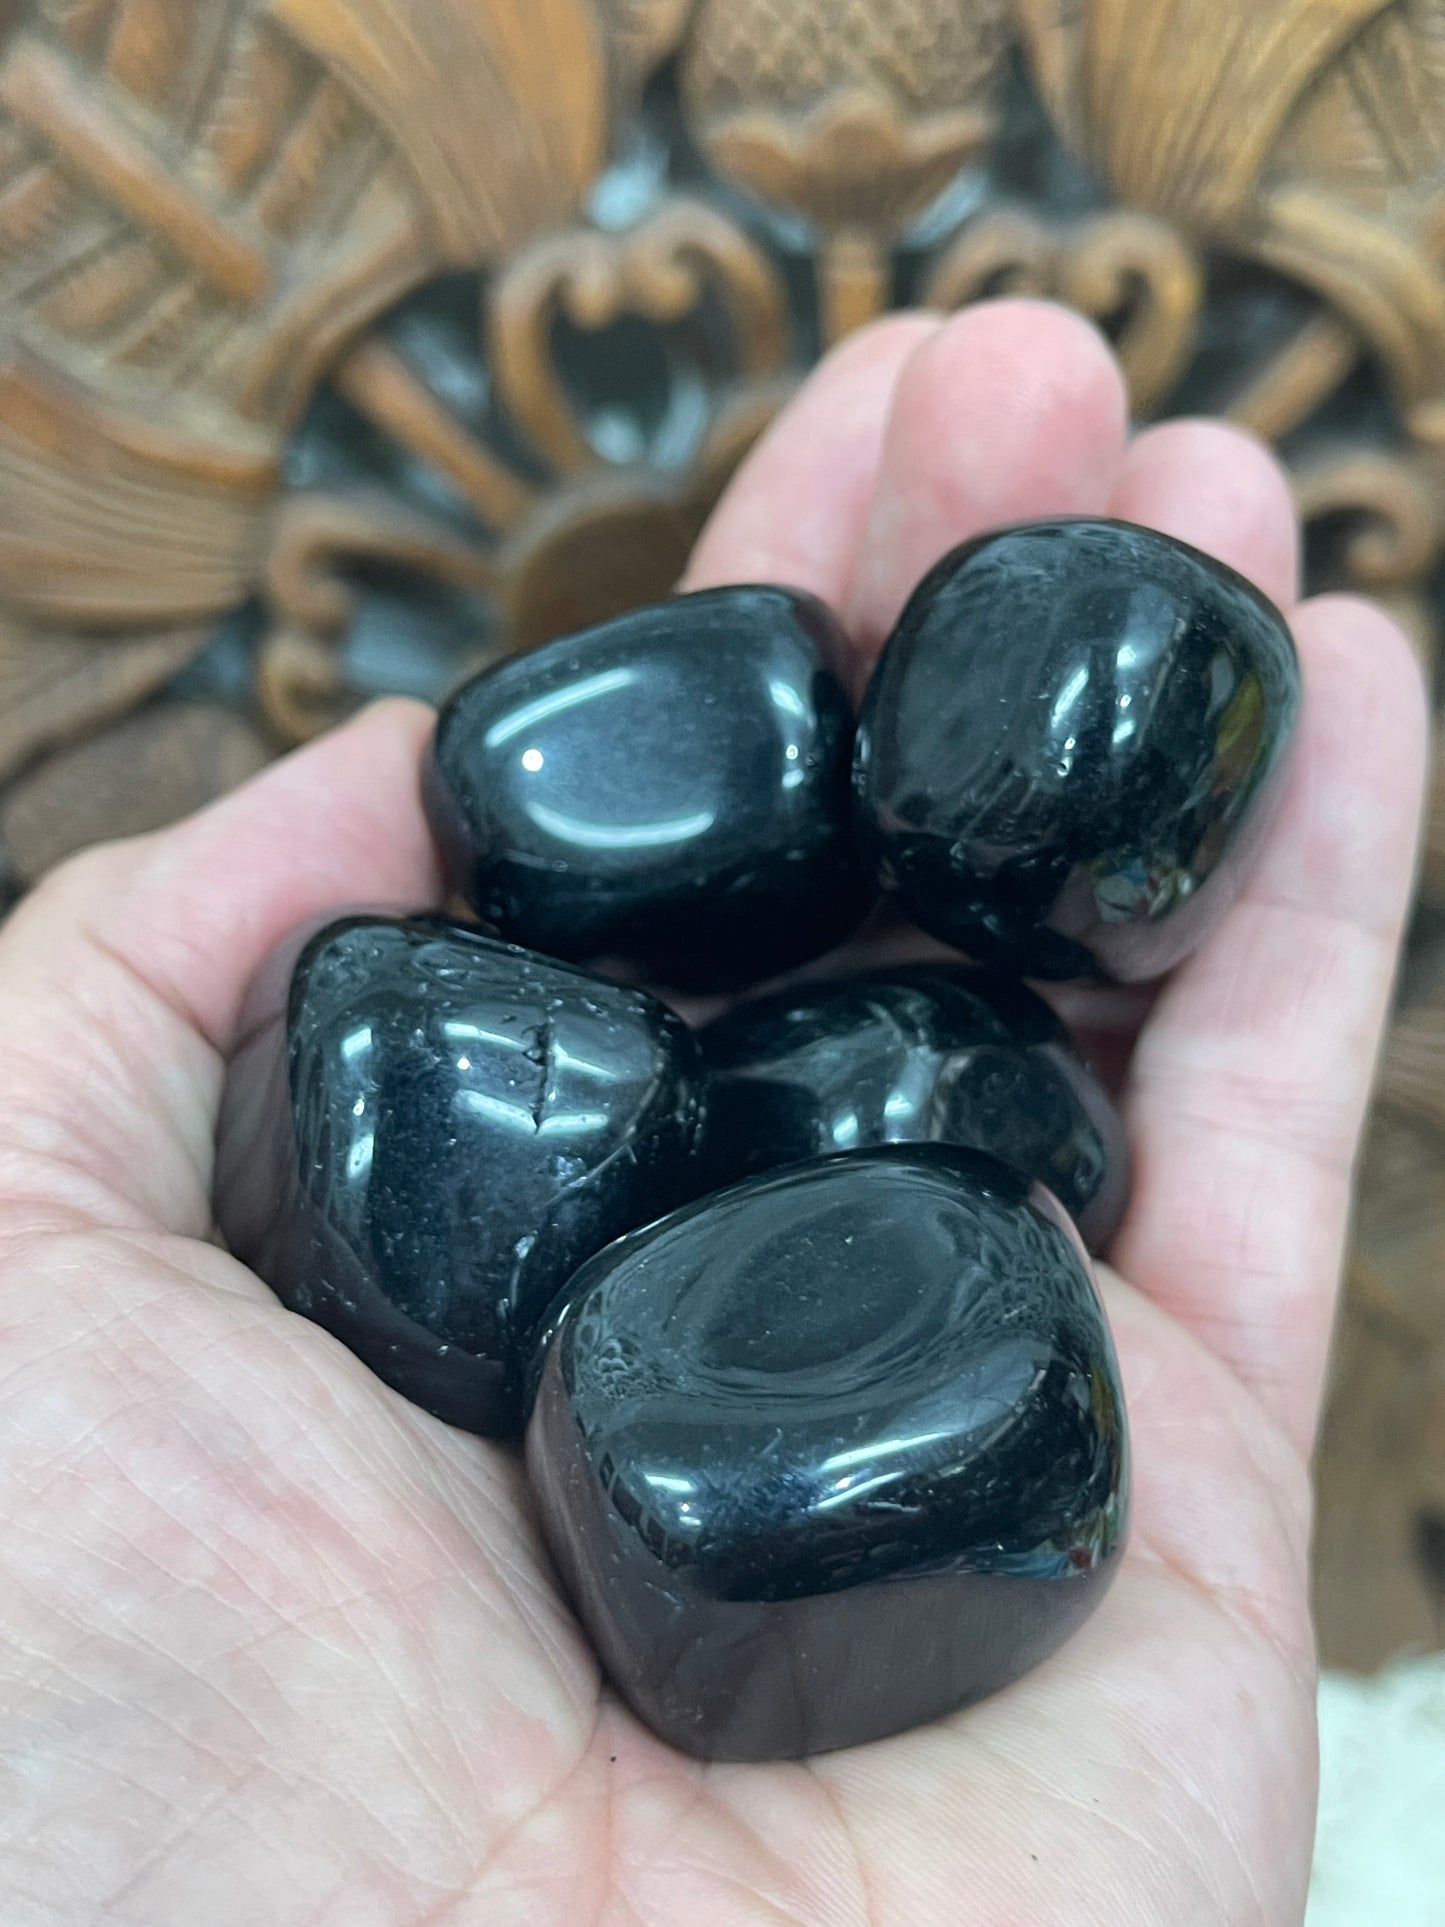 Black Obsidian Tumbled Stones from Mexico - 2 sizes